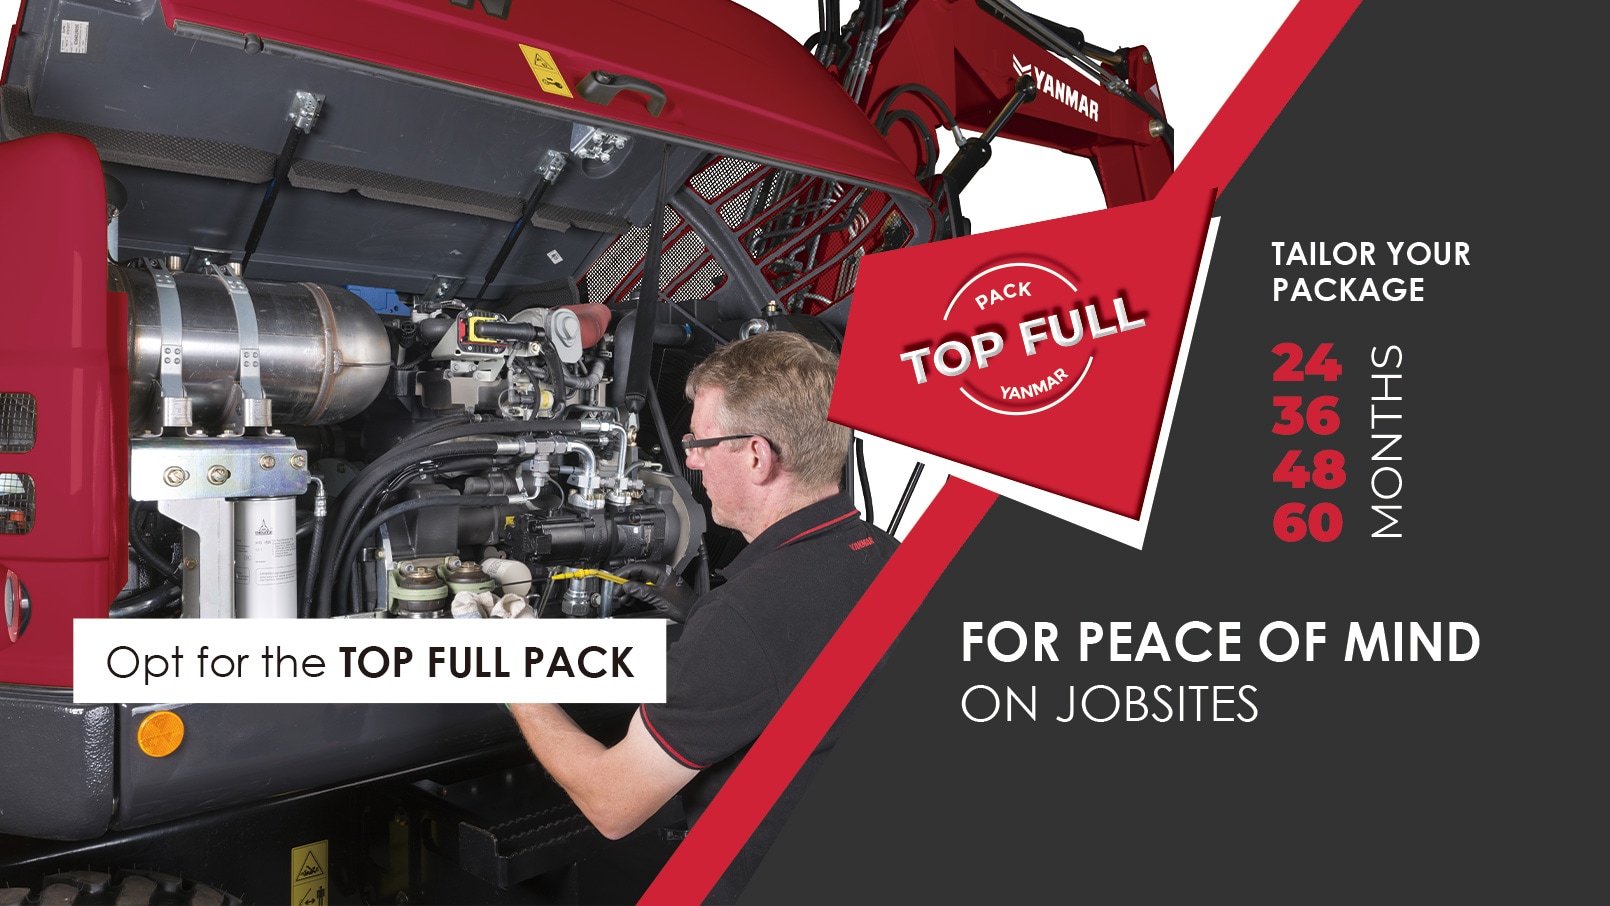 Opt for the TOP FULL PACK FOR PEACE OF MIND ON JOBSITES